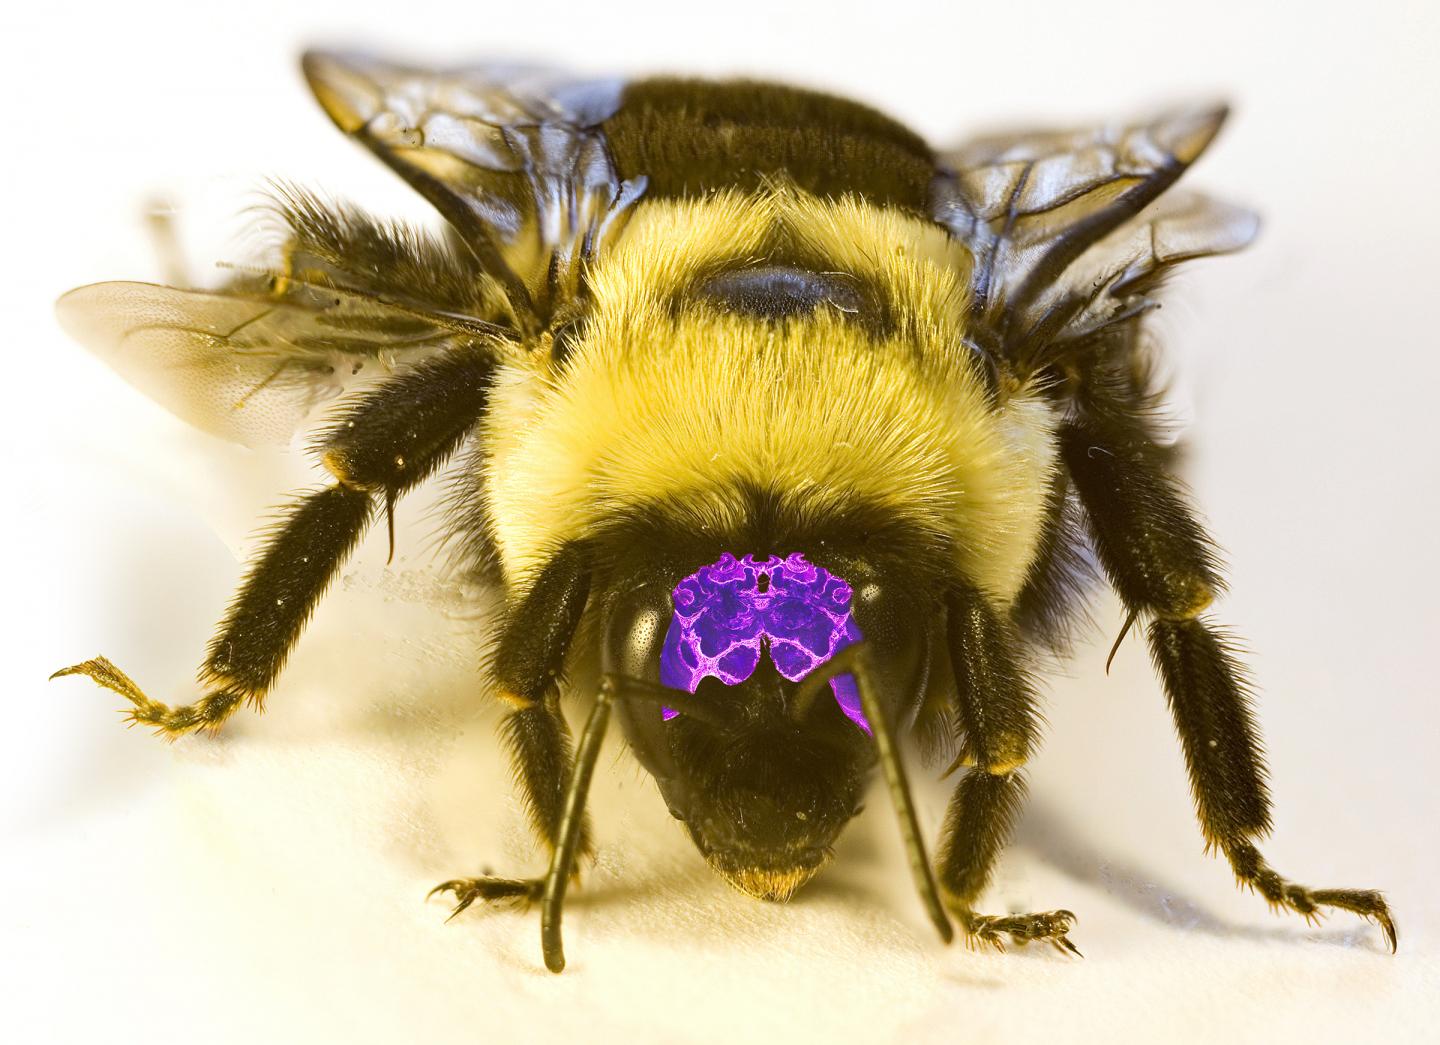 Common Eastern Bumble Bee with Superimposed Stained Brain Image